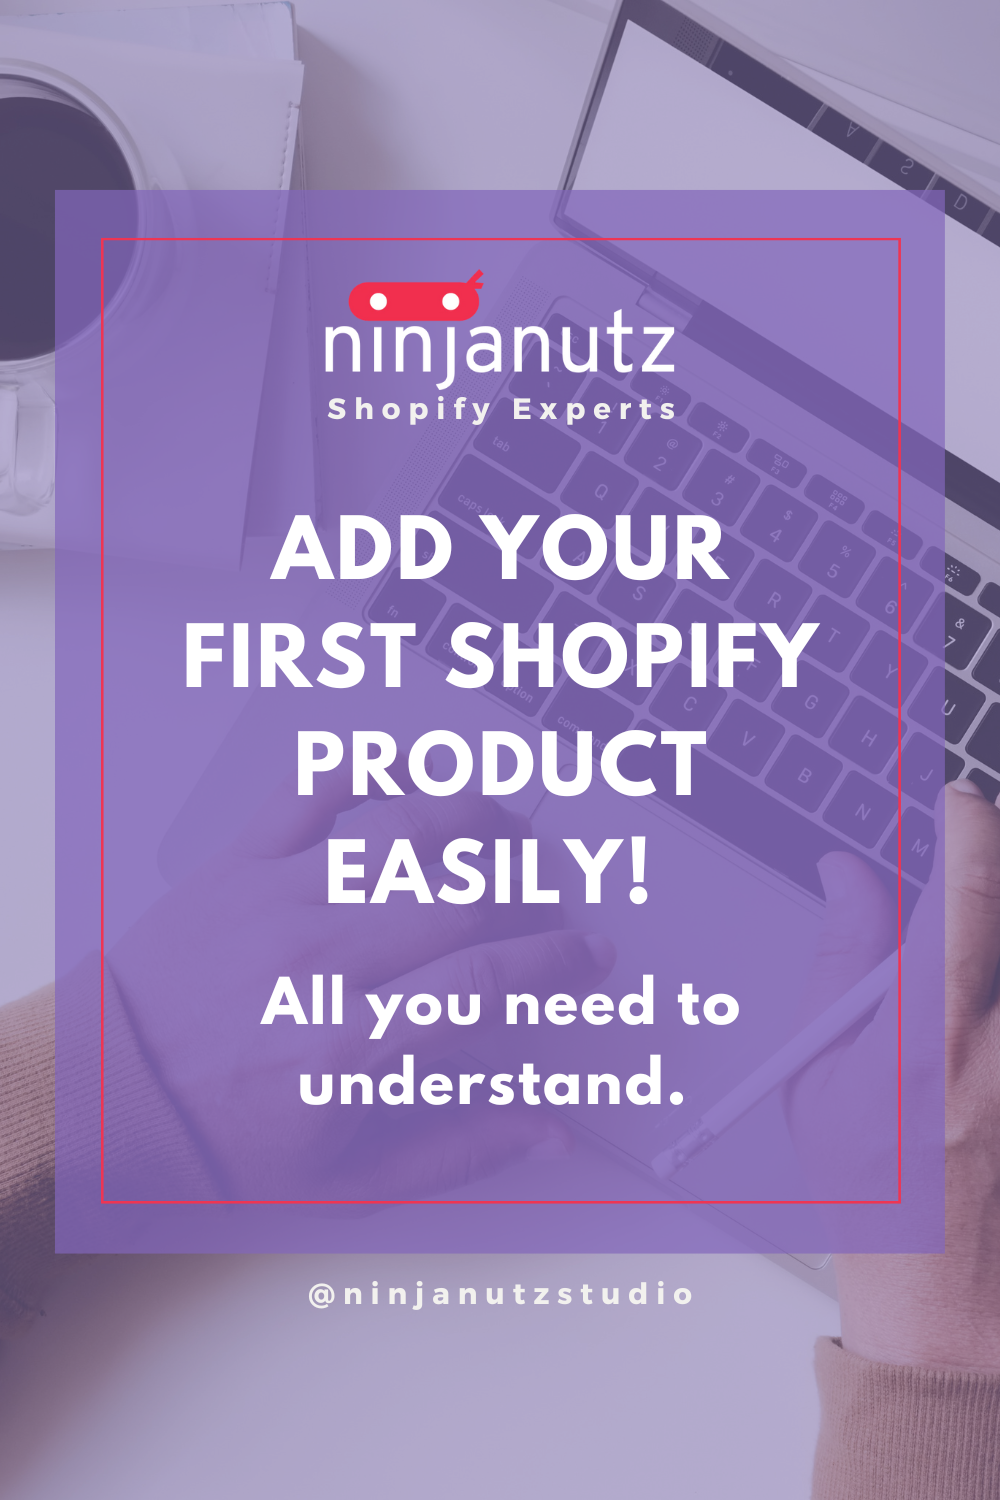 All you need to understand to add your first Shopify product easily! NinjaNutz®